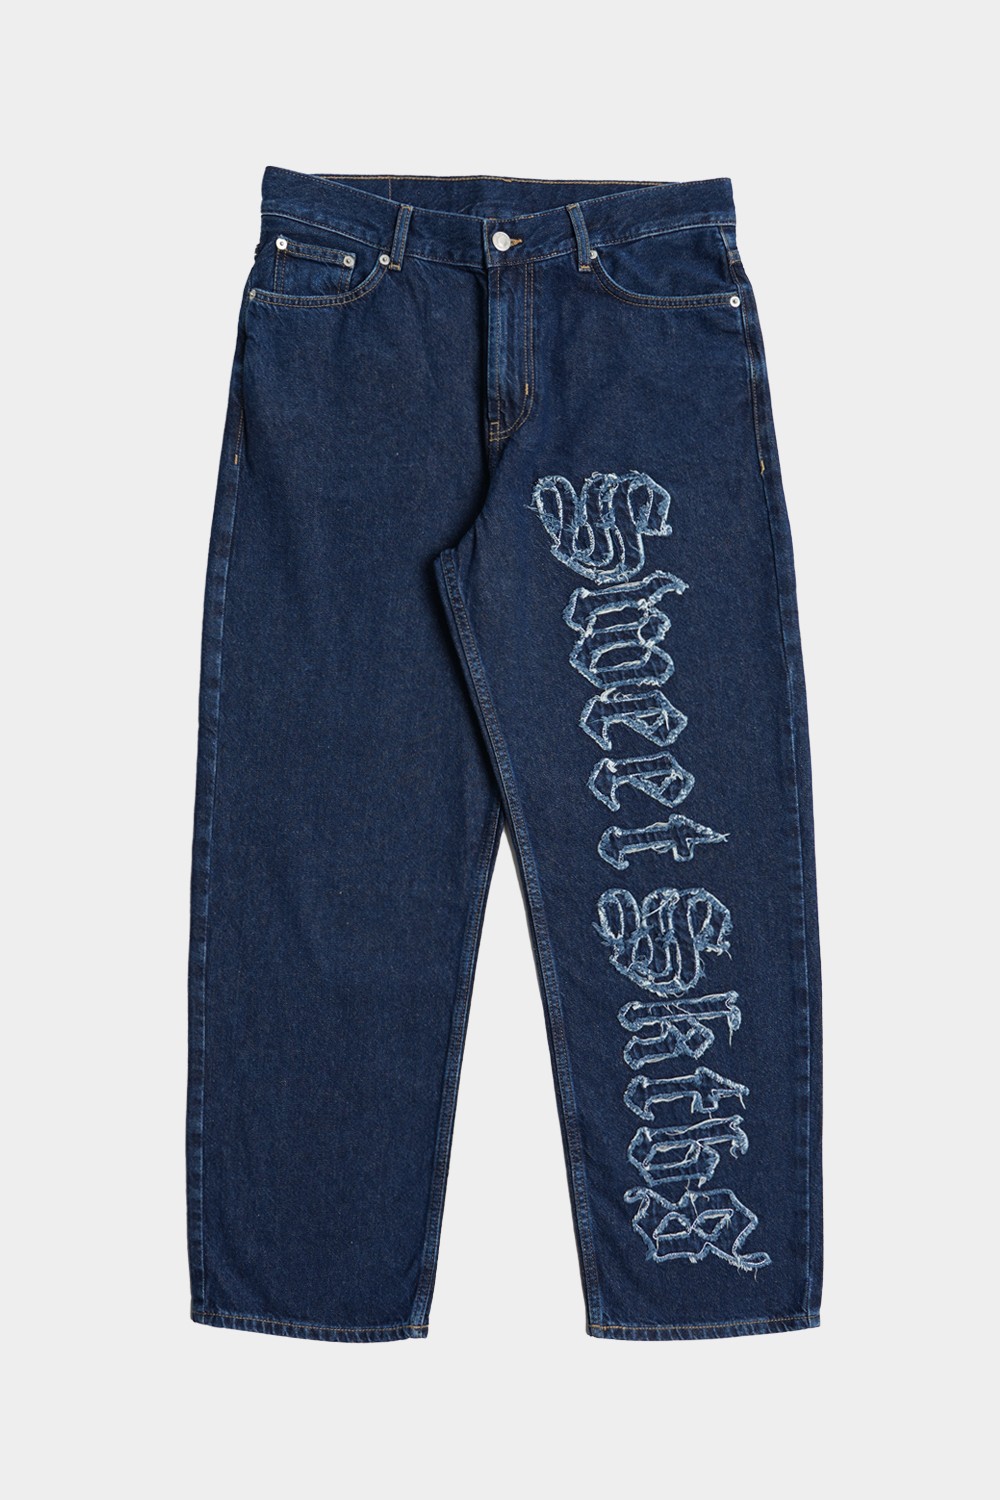 Baggy Skate Application Jeans (SWT-83)